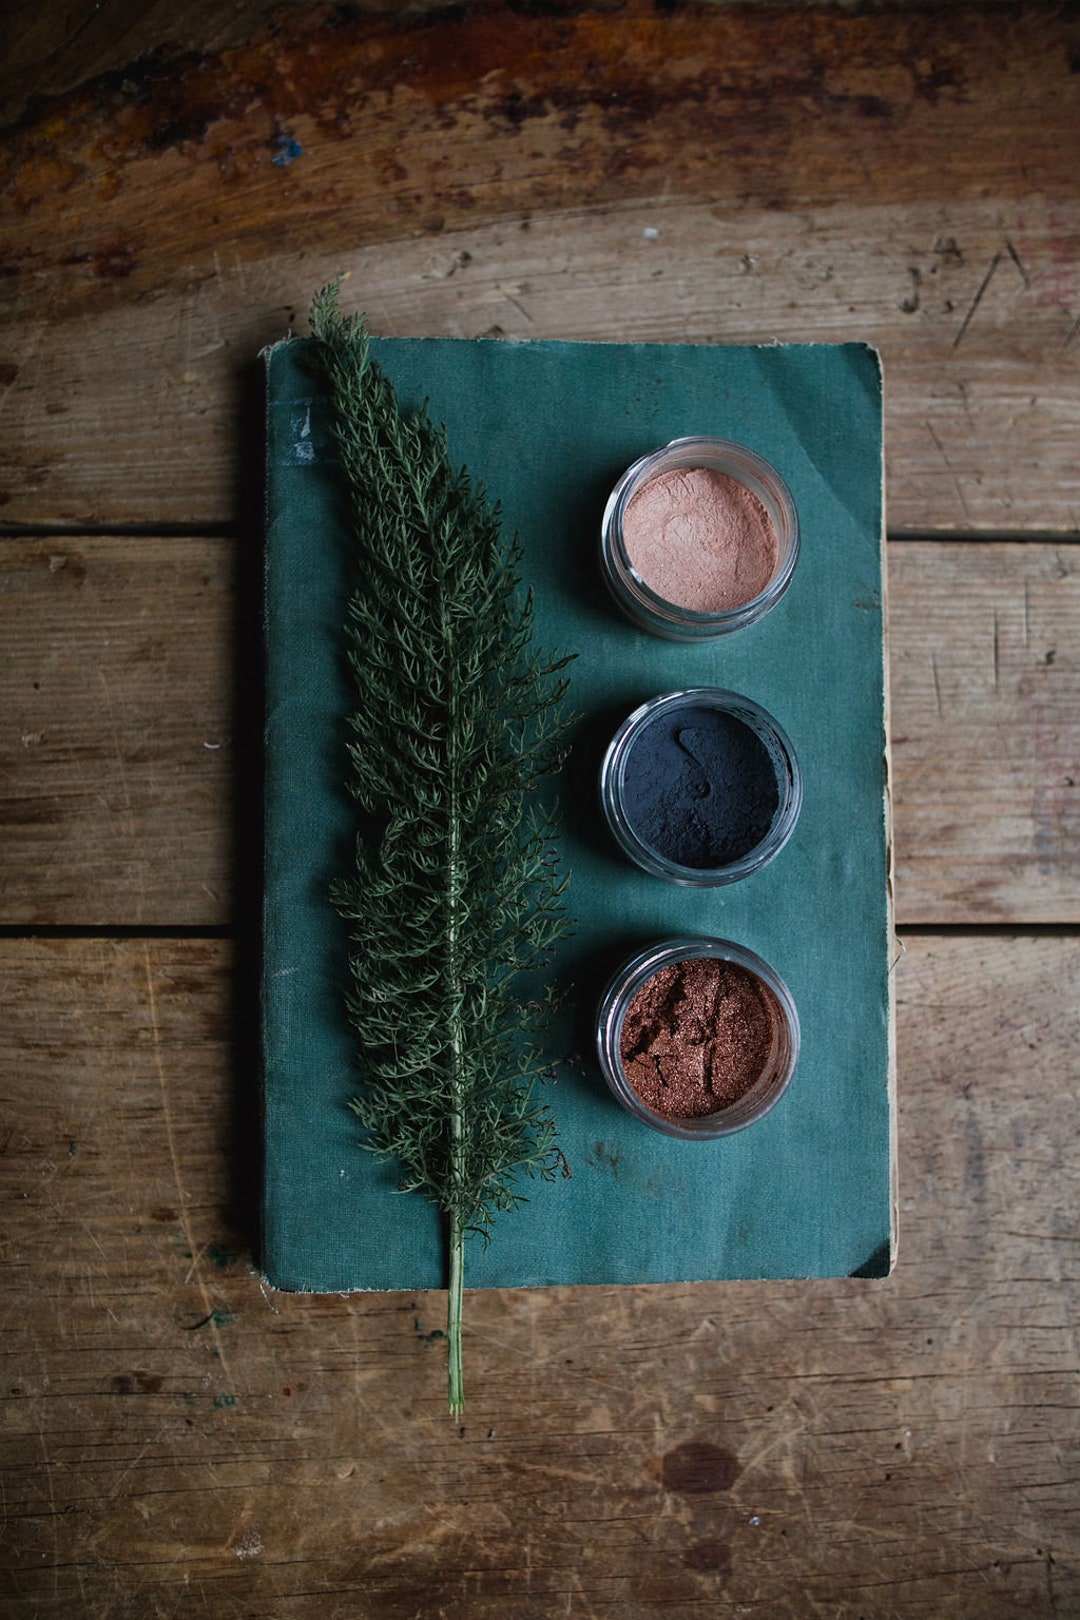 Loose Planet Etsy Shadows Natural Wise Vegan Cosmetics Eye - Earth Mineral Powder Mineral All